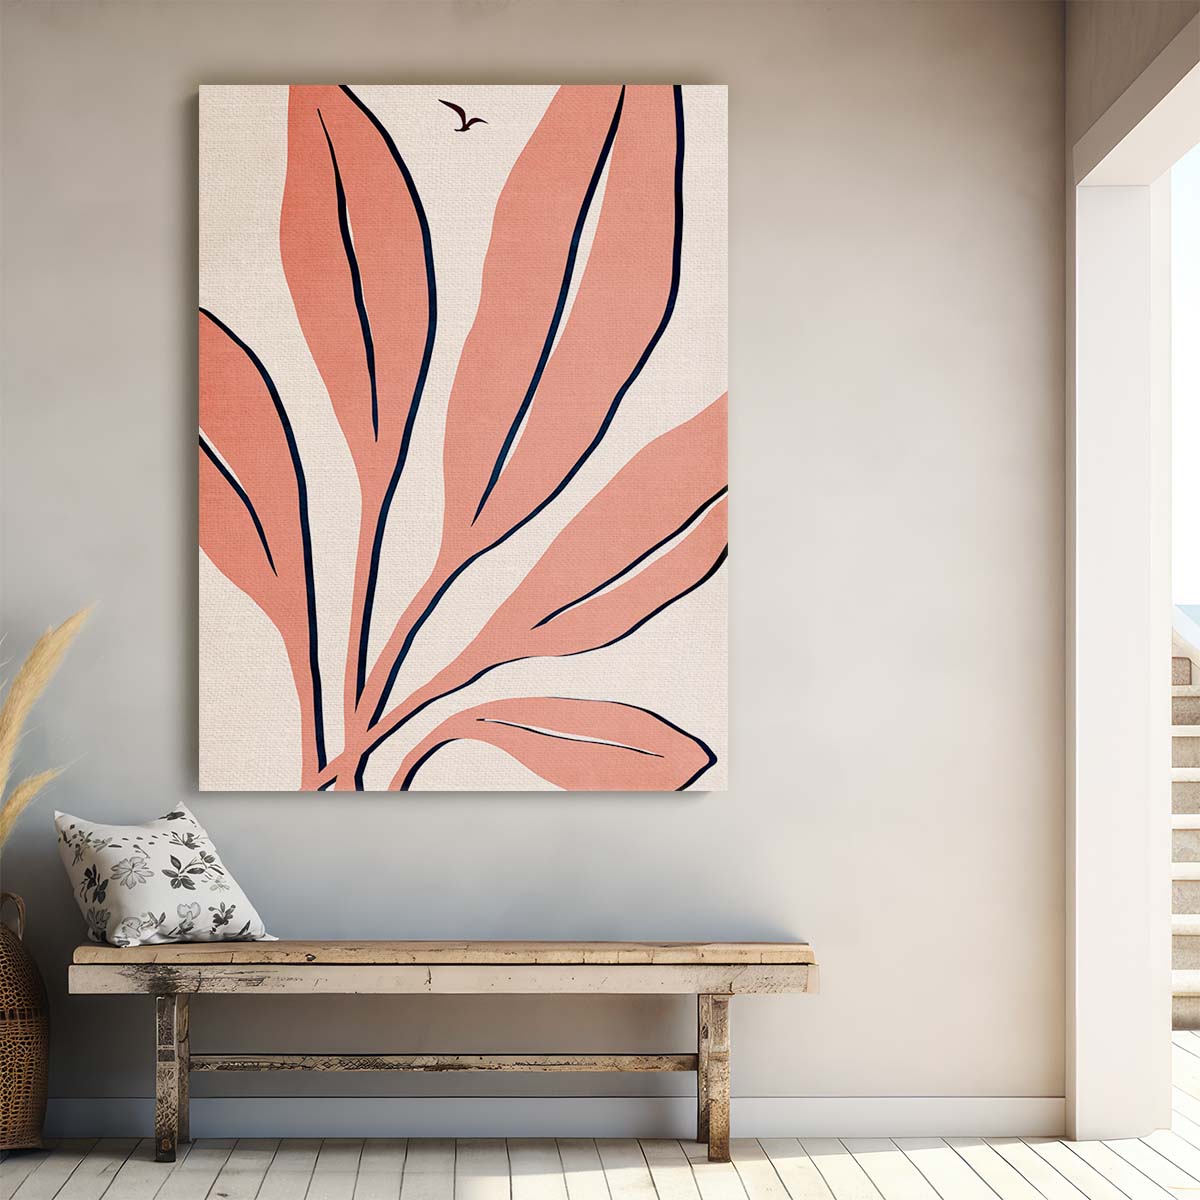 Kubistika's Bright Pink Ophelia Rose Illustration with Red Bird by Luxuriance Designs, made in USA